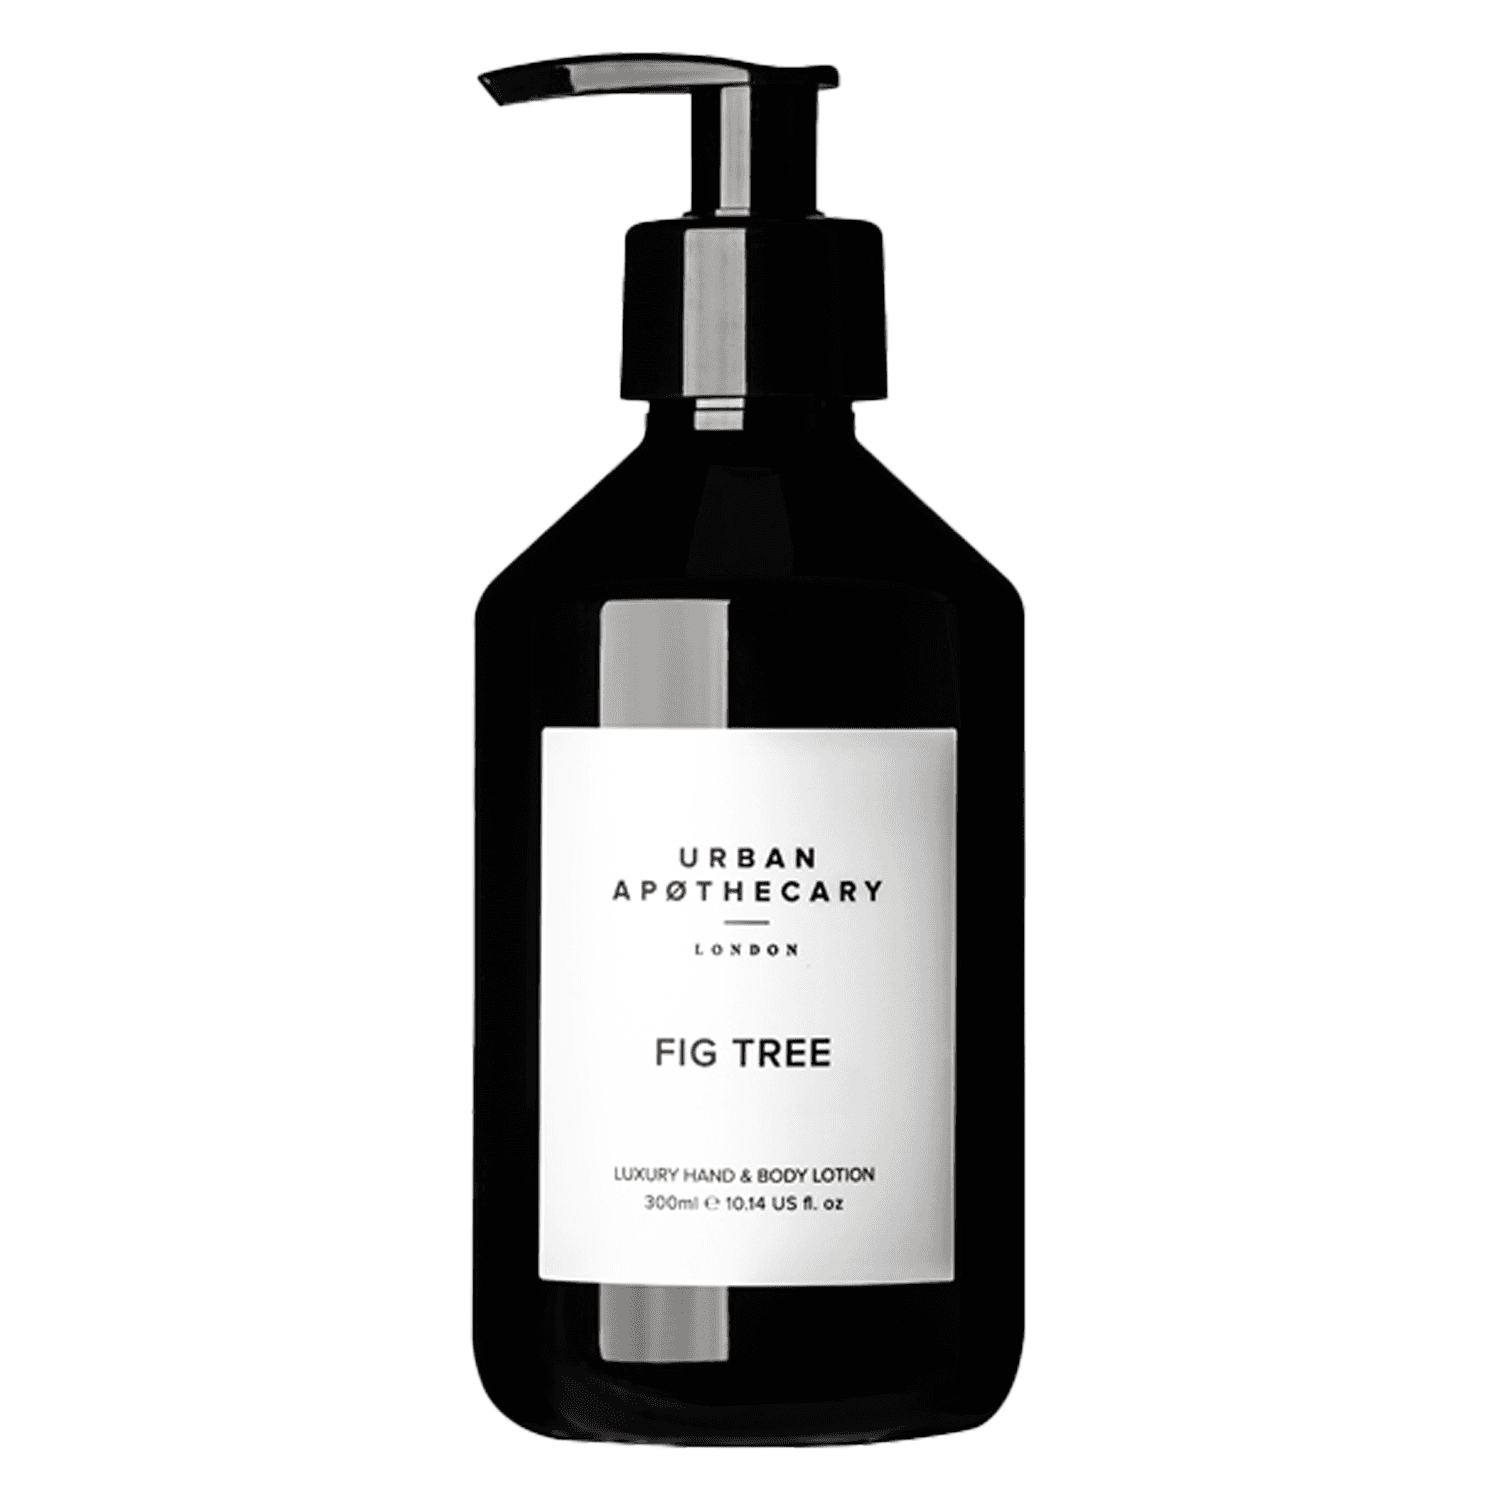 Urban Apothecary - Luxury Hand & Body Lotion Fig Tree